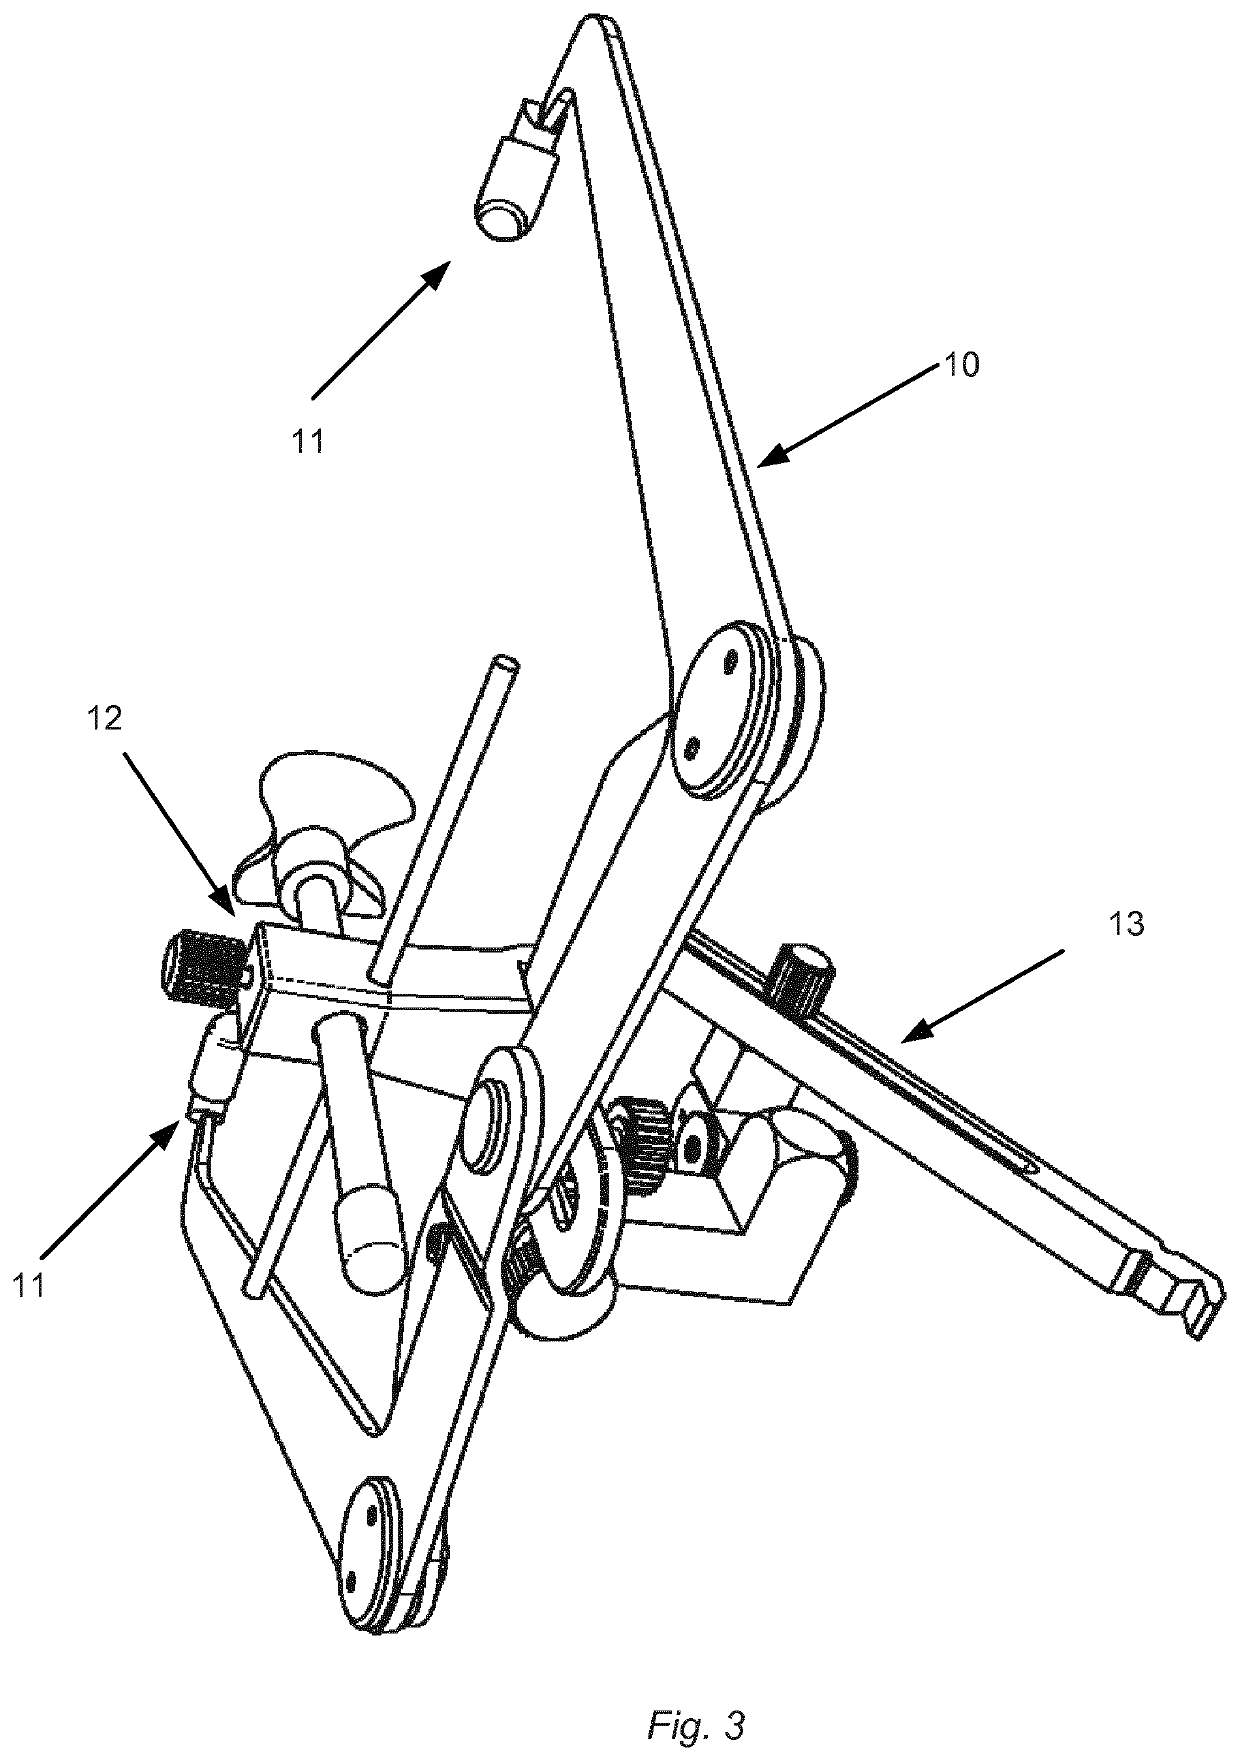 Facebow and method of using a facebow